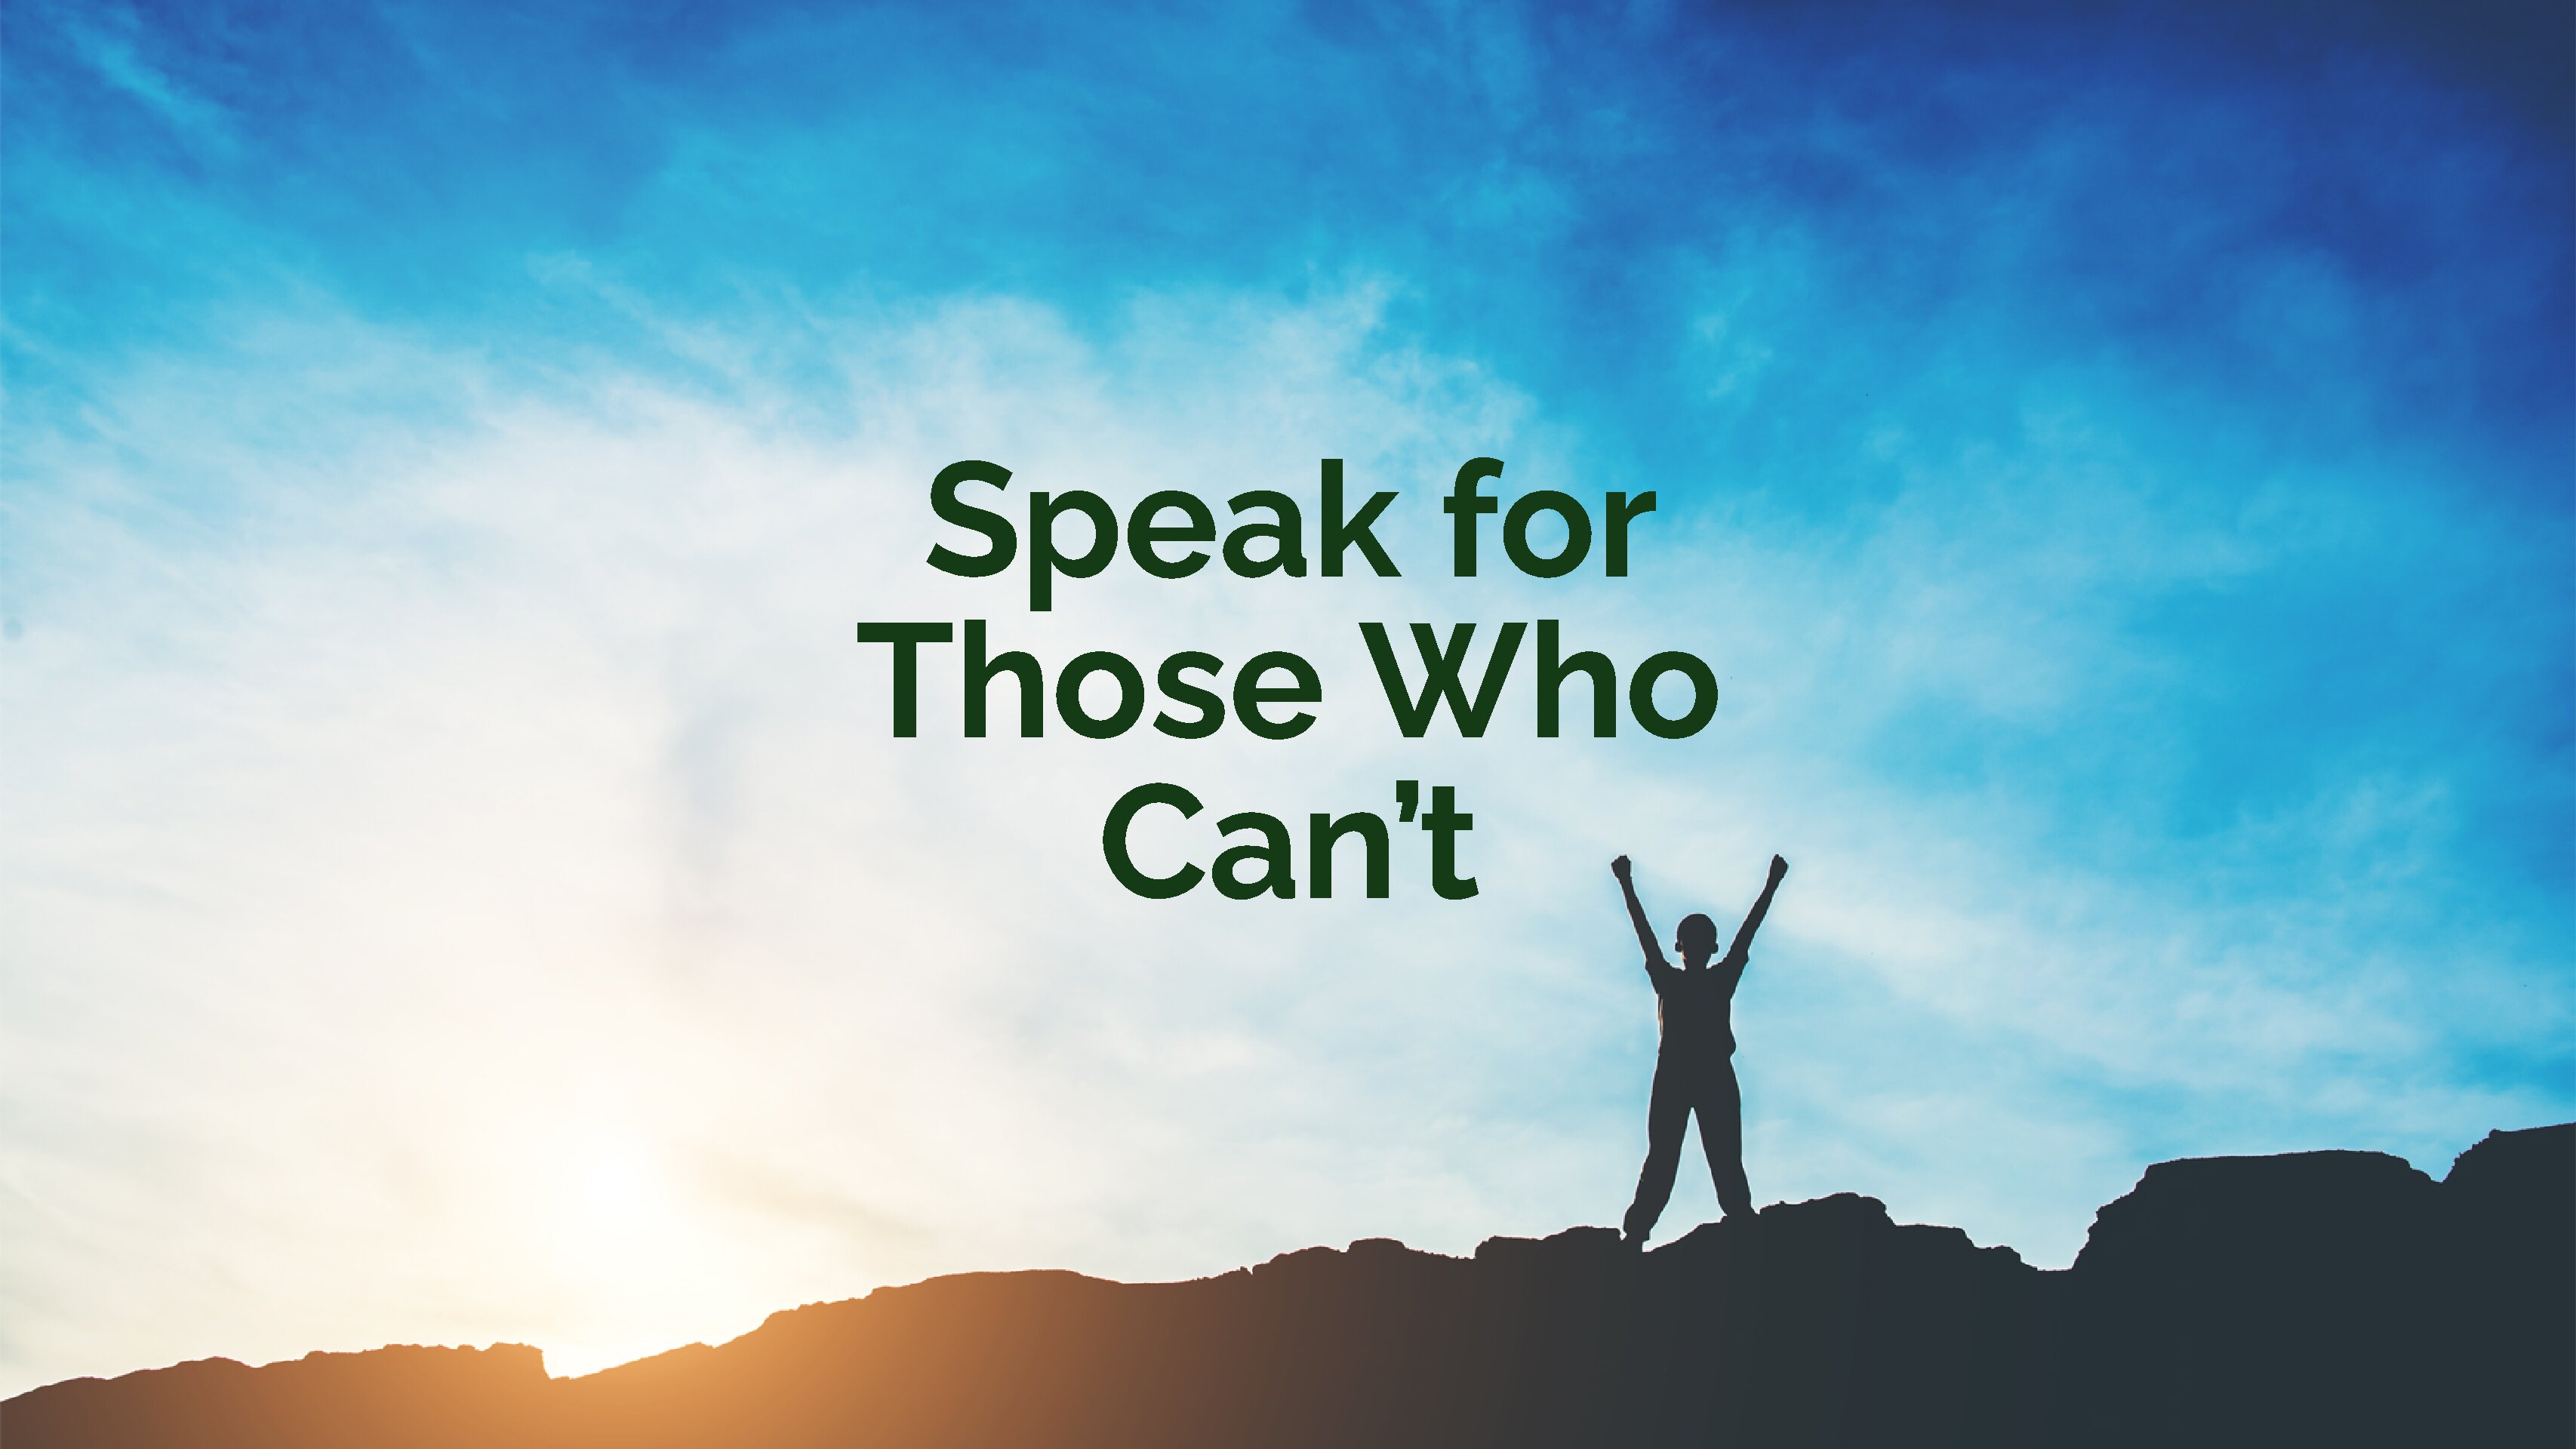 Speak for Those Who Can’t